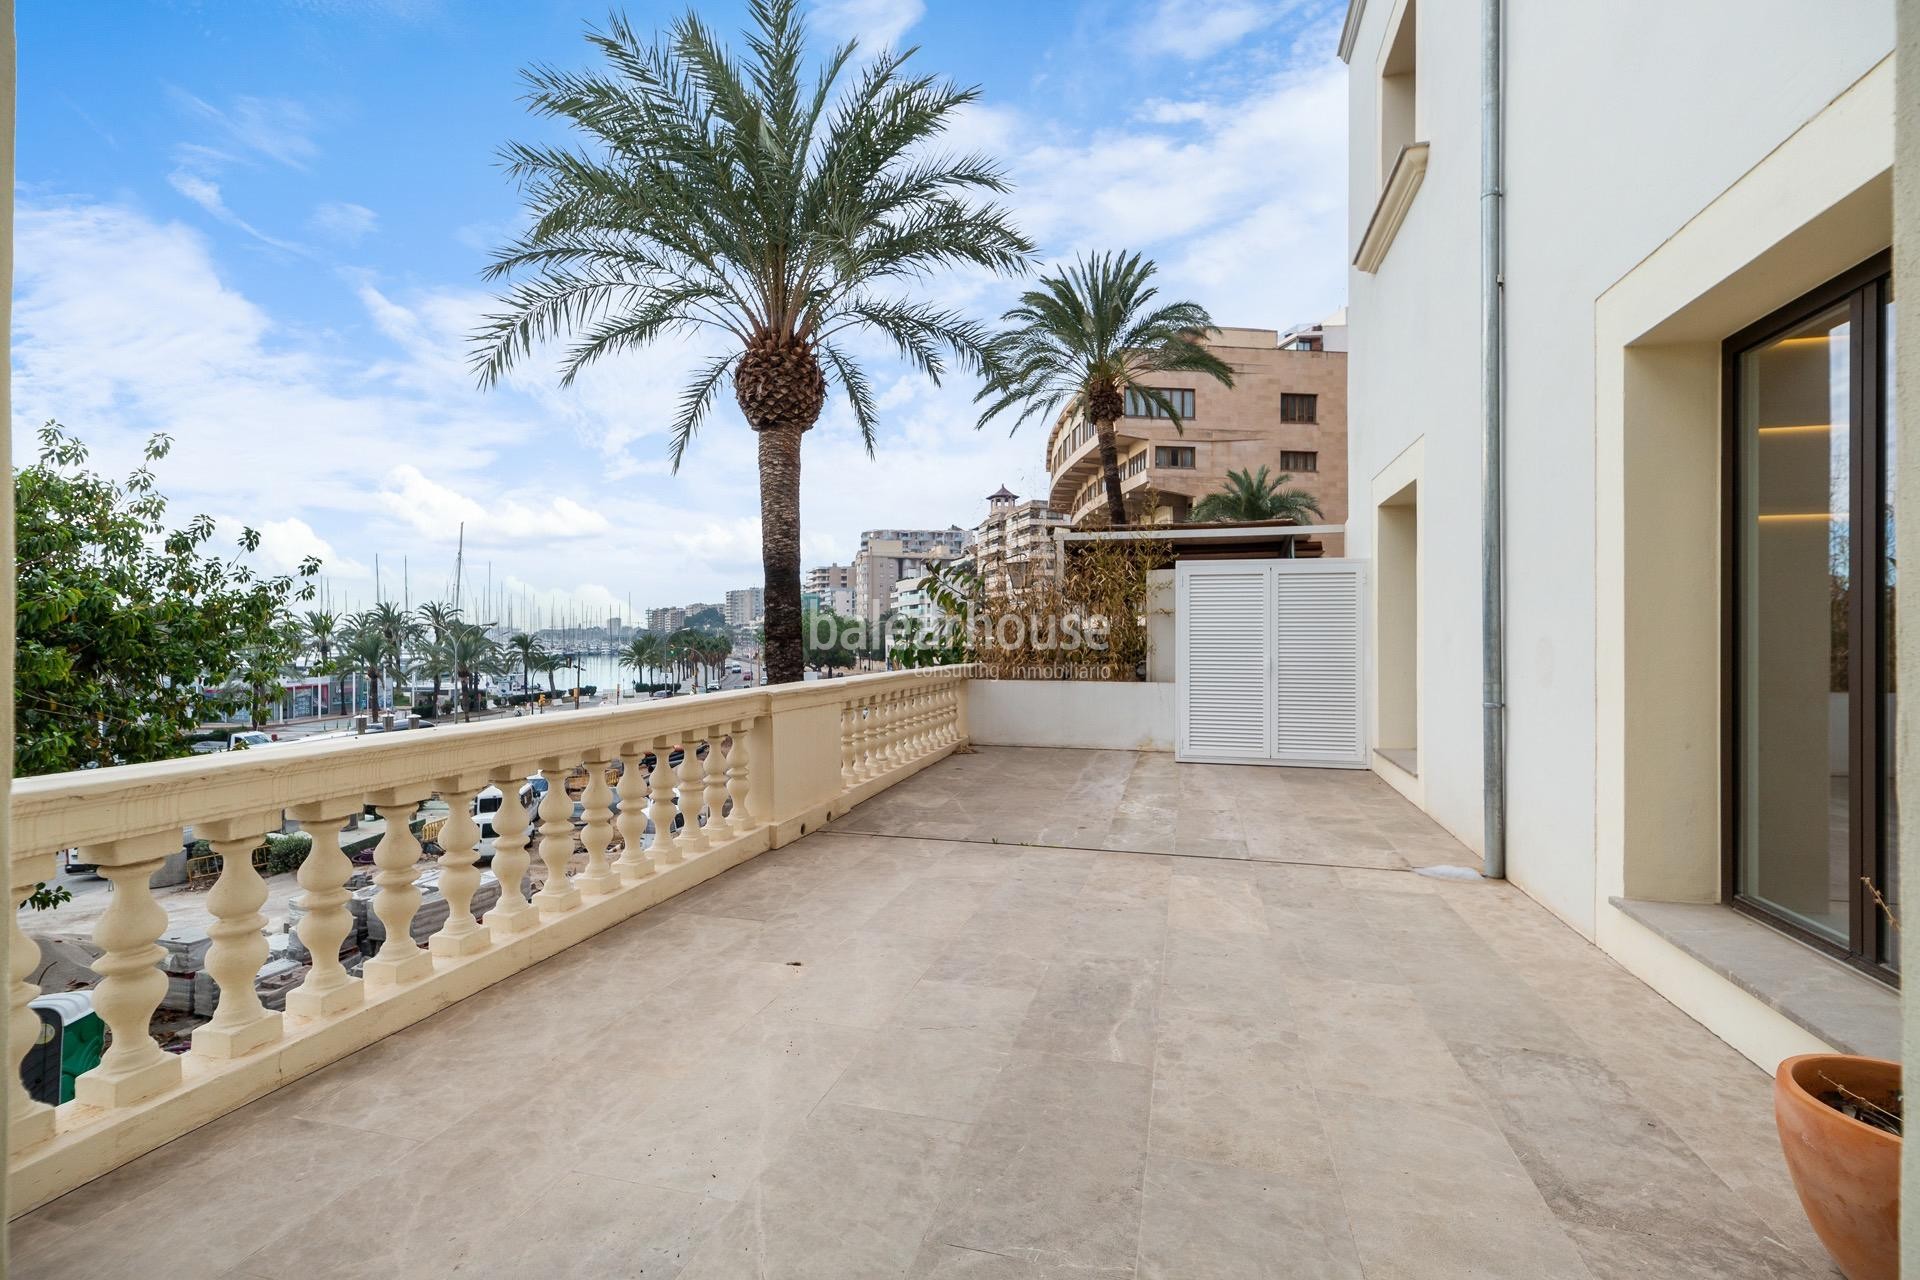 Large refurbished flat with modern spaces and sea views in Paseo Marítimo